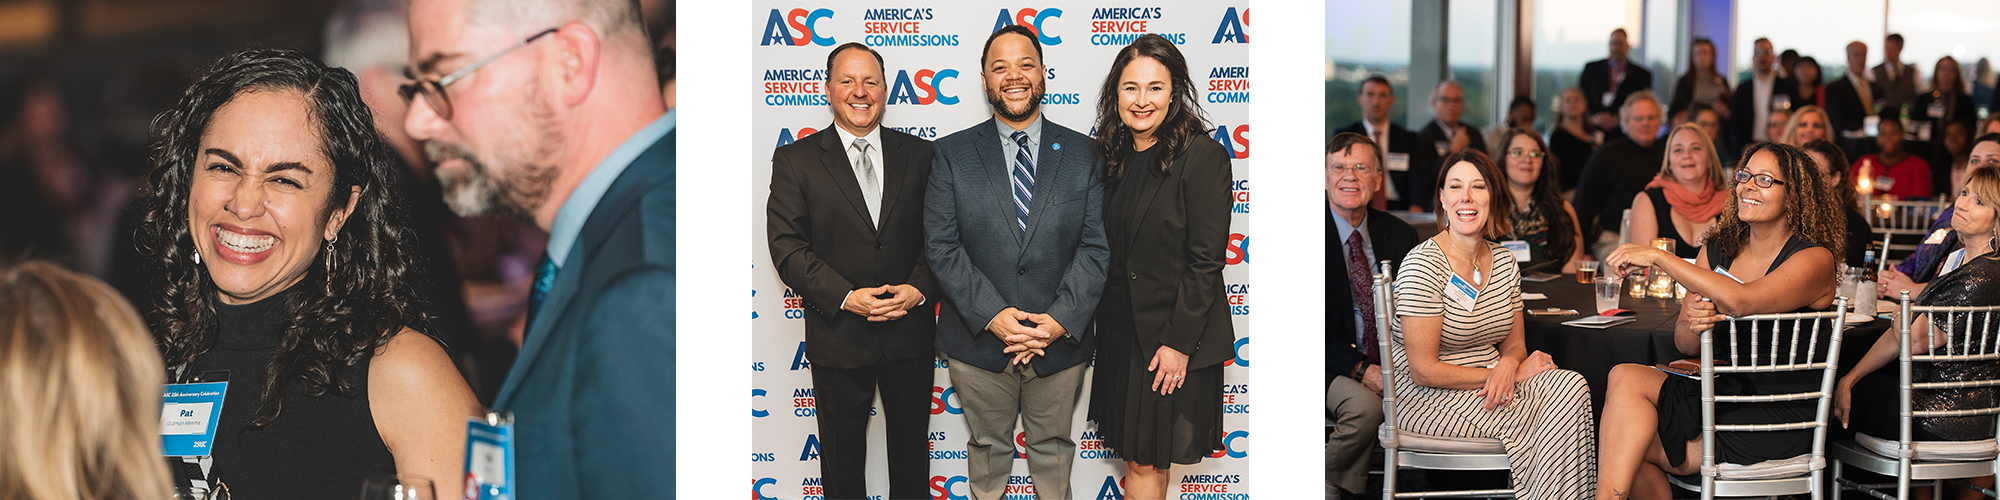 decorative. three photos. 1) Pat Guzmán-Weema smiling during conversation. 2) Judd Jeansonne, Michael Smith, and Kaira Esgate posed in front of the ASC step-and-repeat backdrop. 3) Attendees seated at tables watching the program and smiling